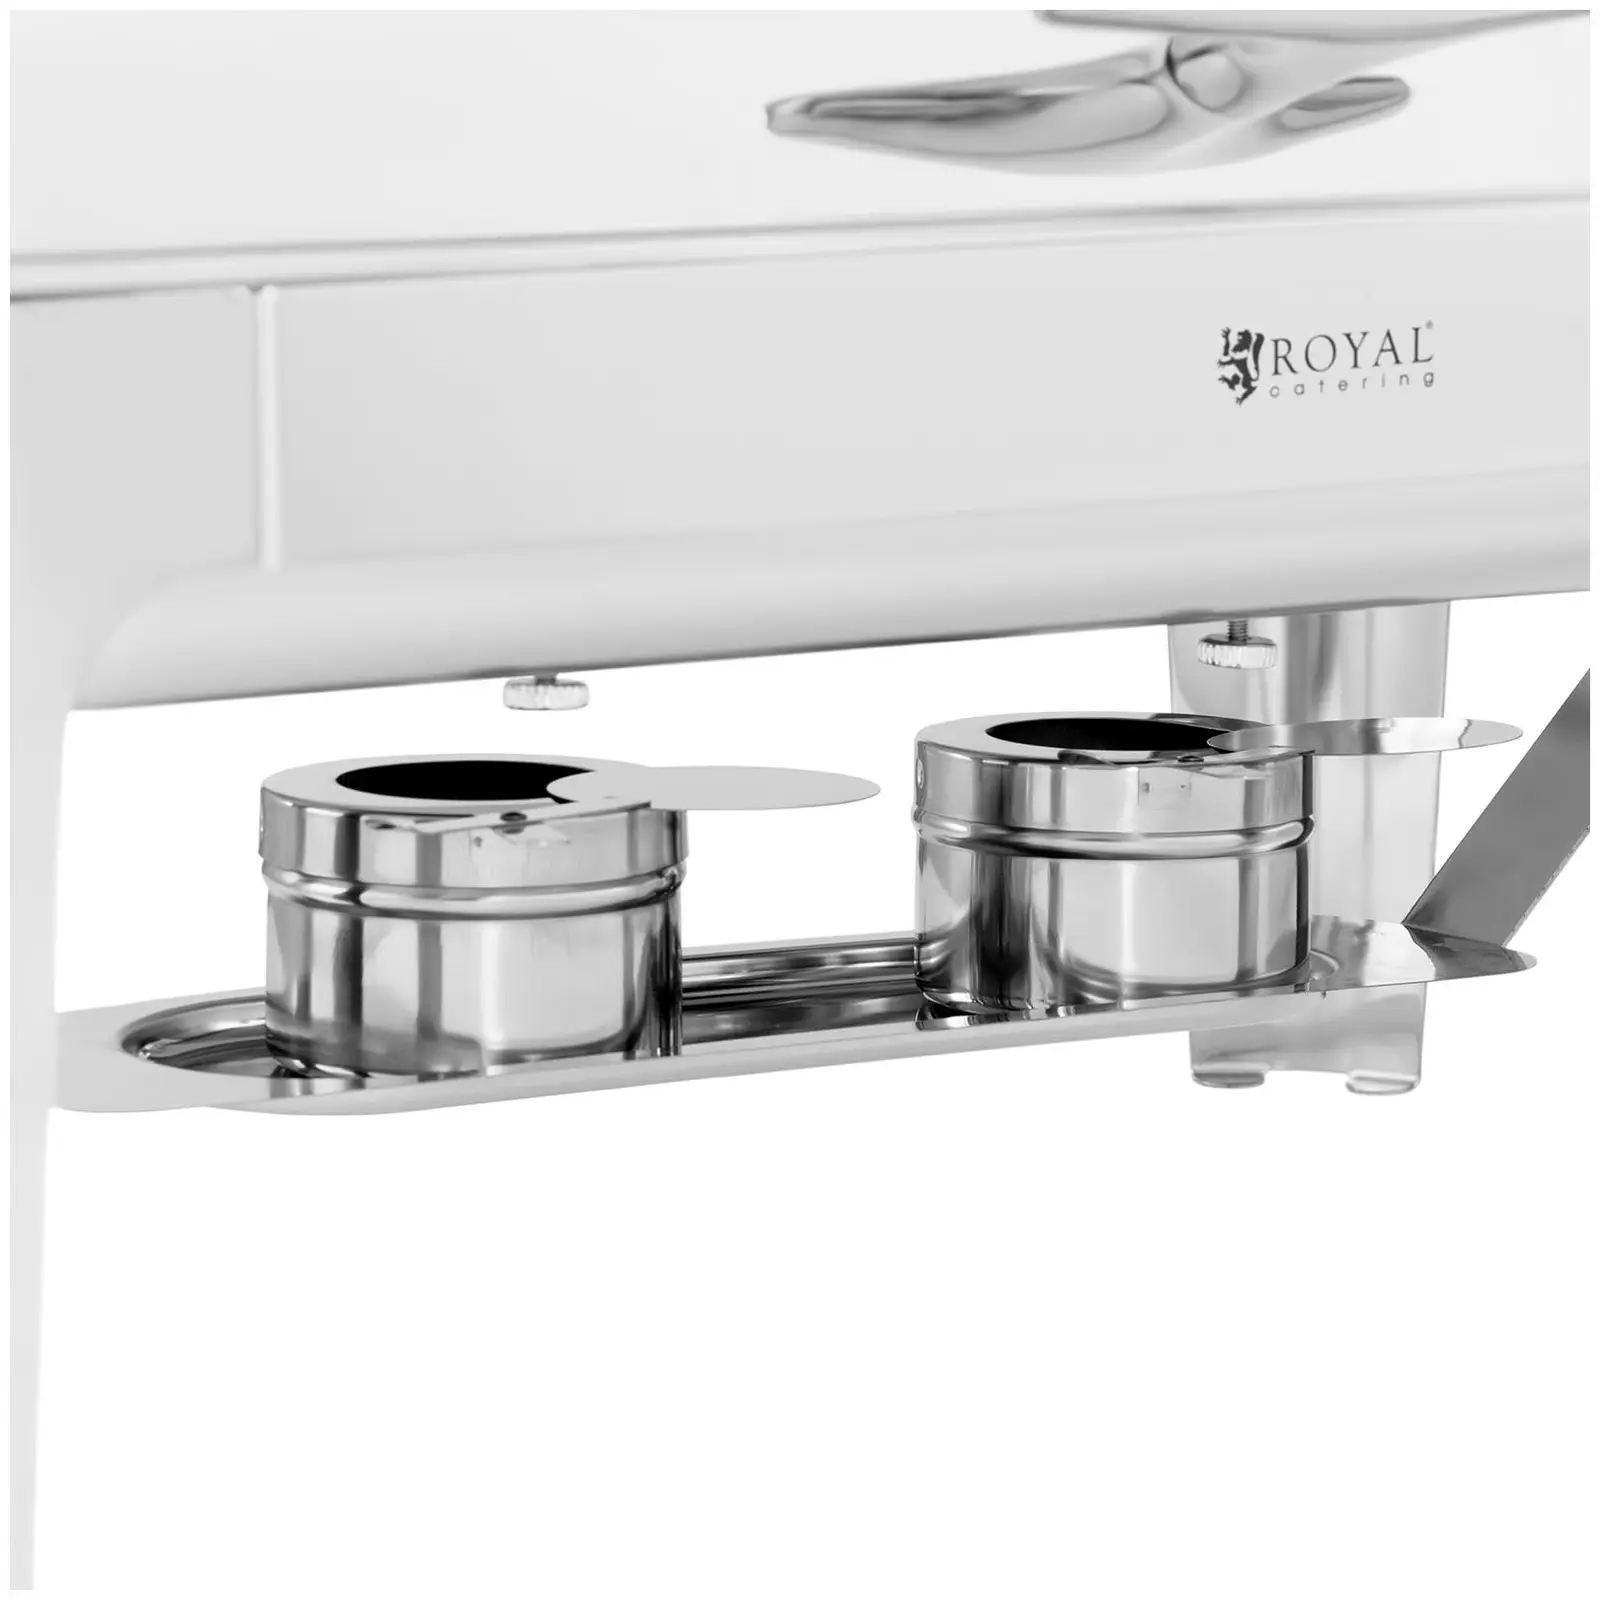 Chafing Dish - GN 1/1 - Royal Catering - 8,5 L - 2 contenedores de combustible - Ventana